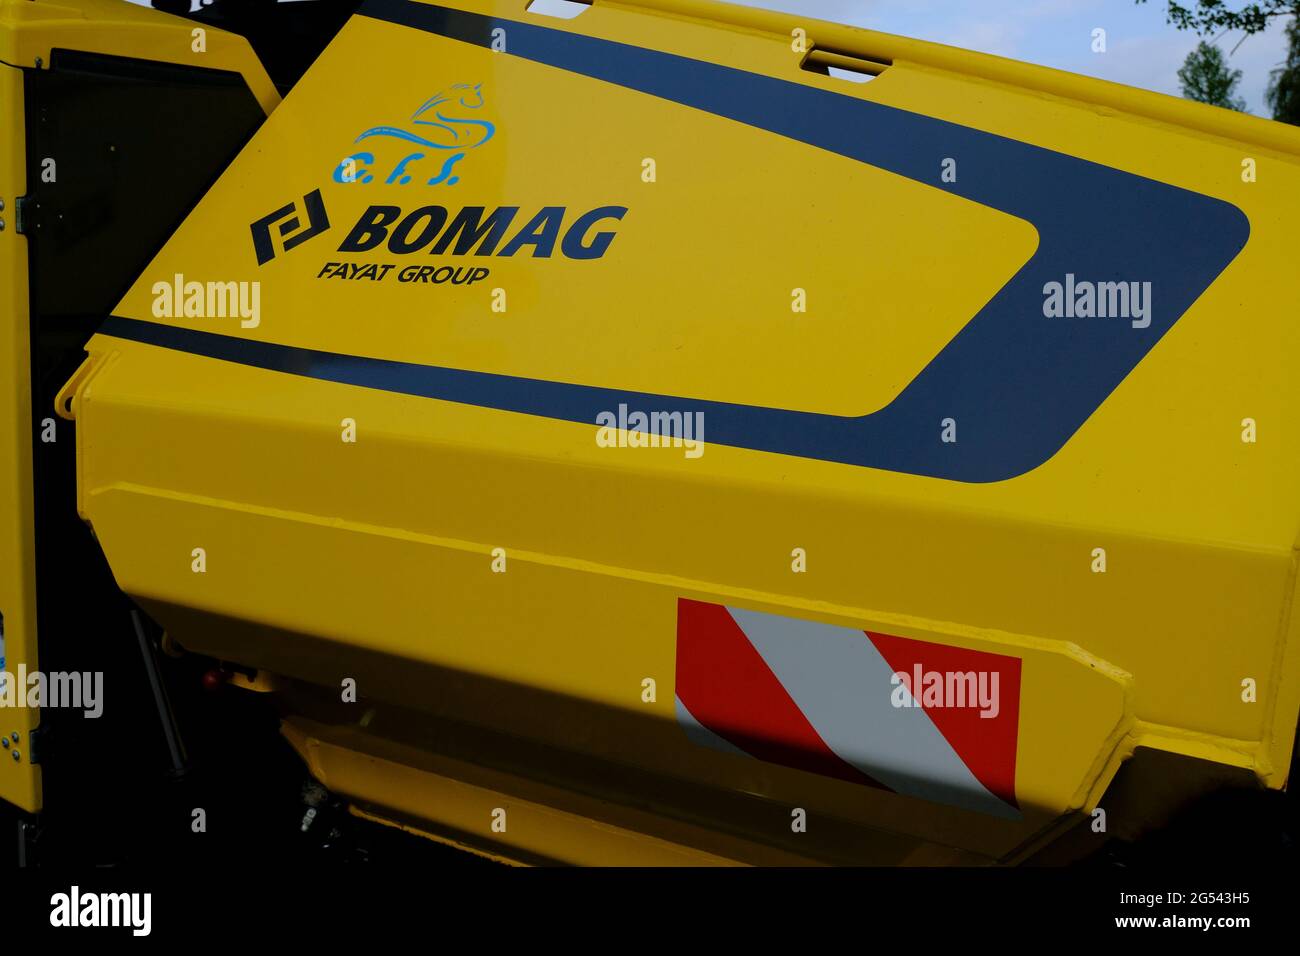 June 2021 Parma, Italy: Huge yellow Bomag heavy road machine close-up parked and ready for road construction and tarmacking. Asphalt paver machine Stock Photo